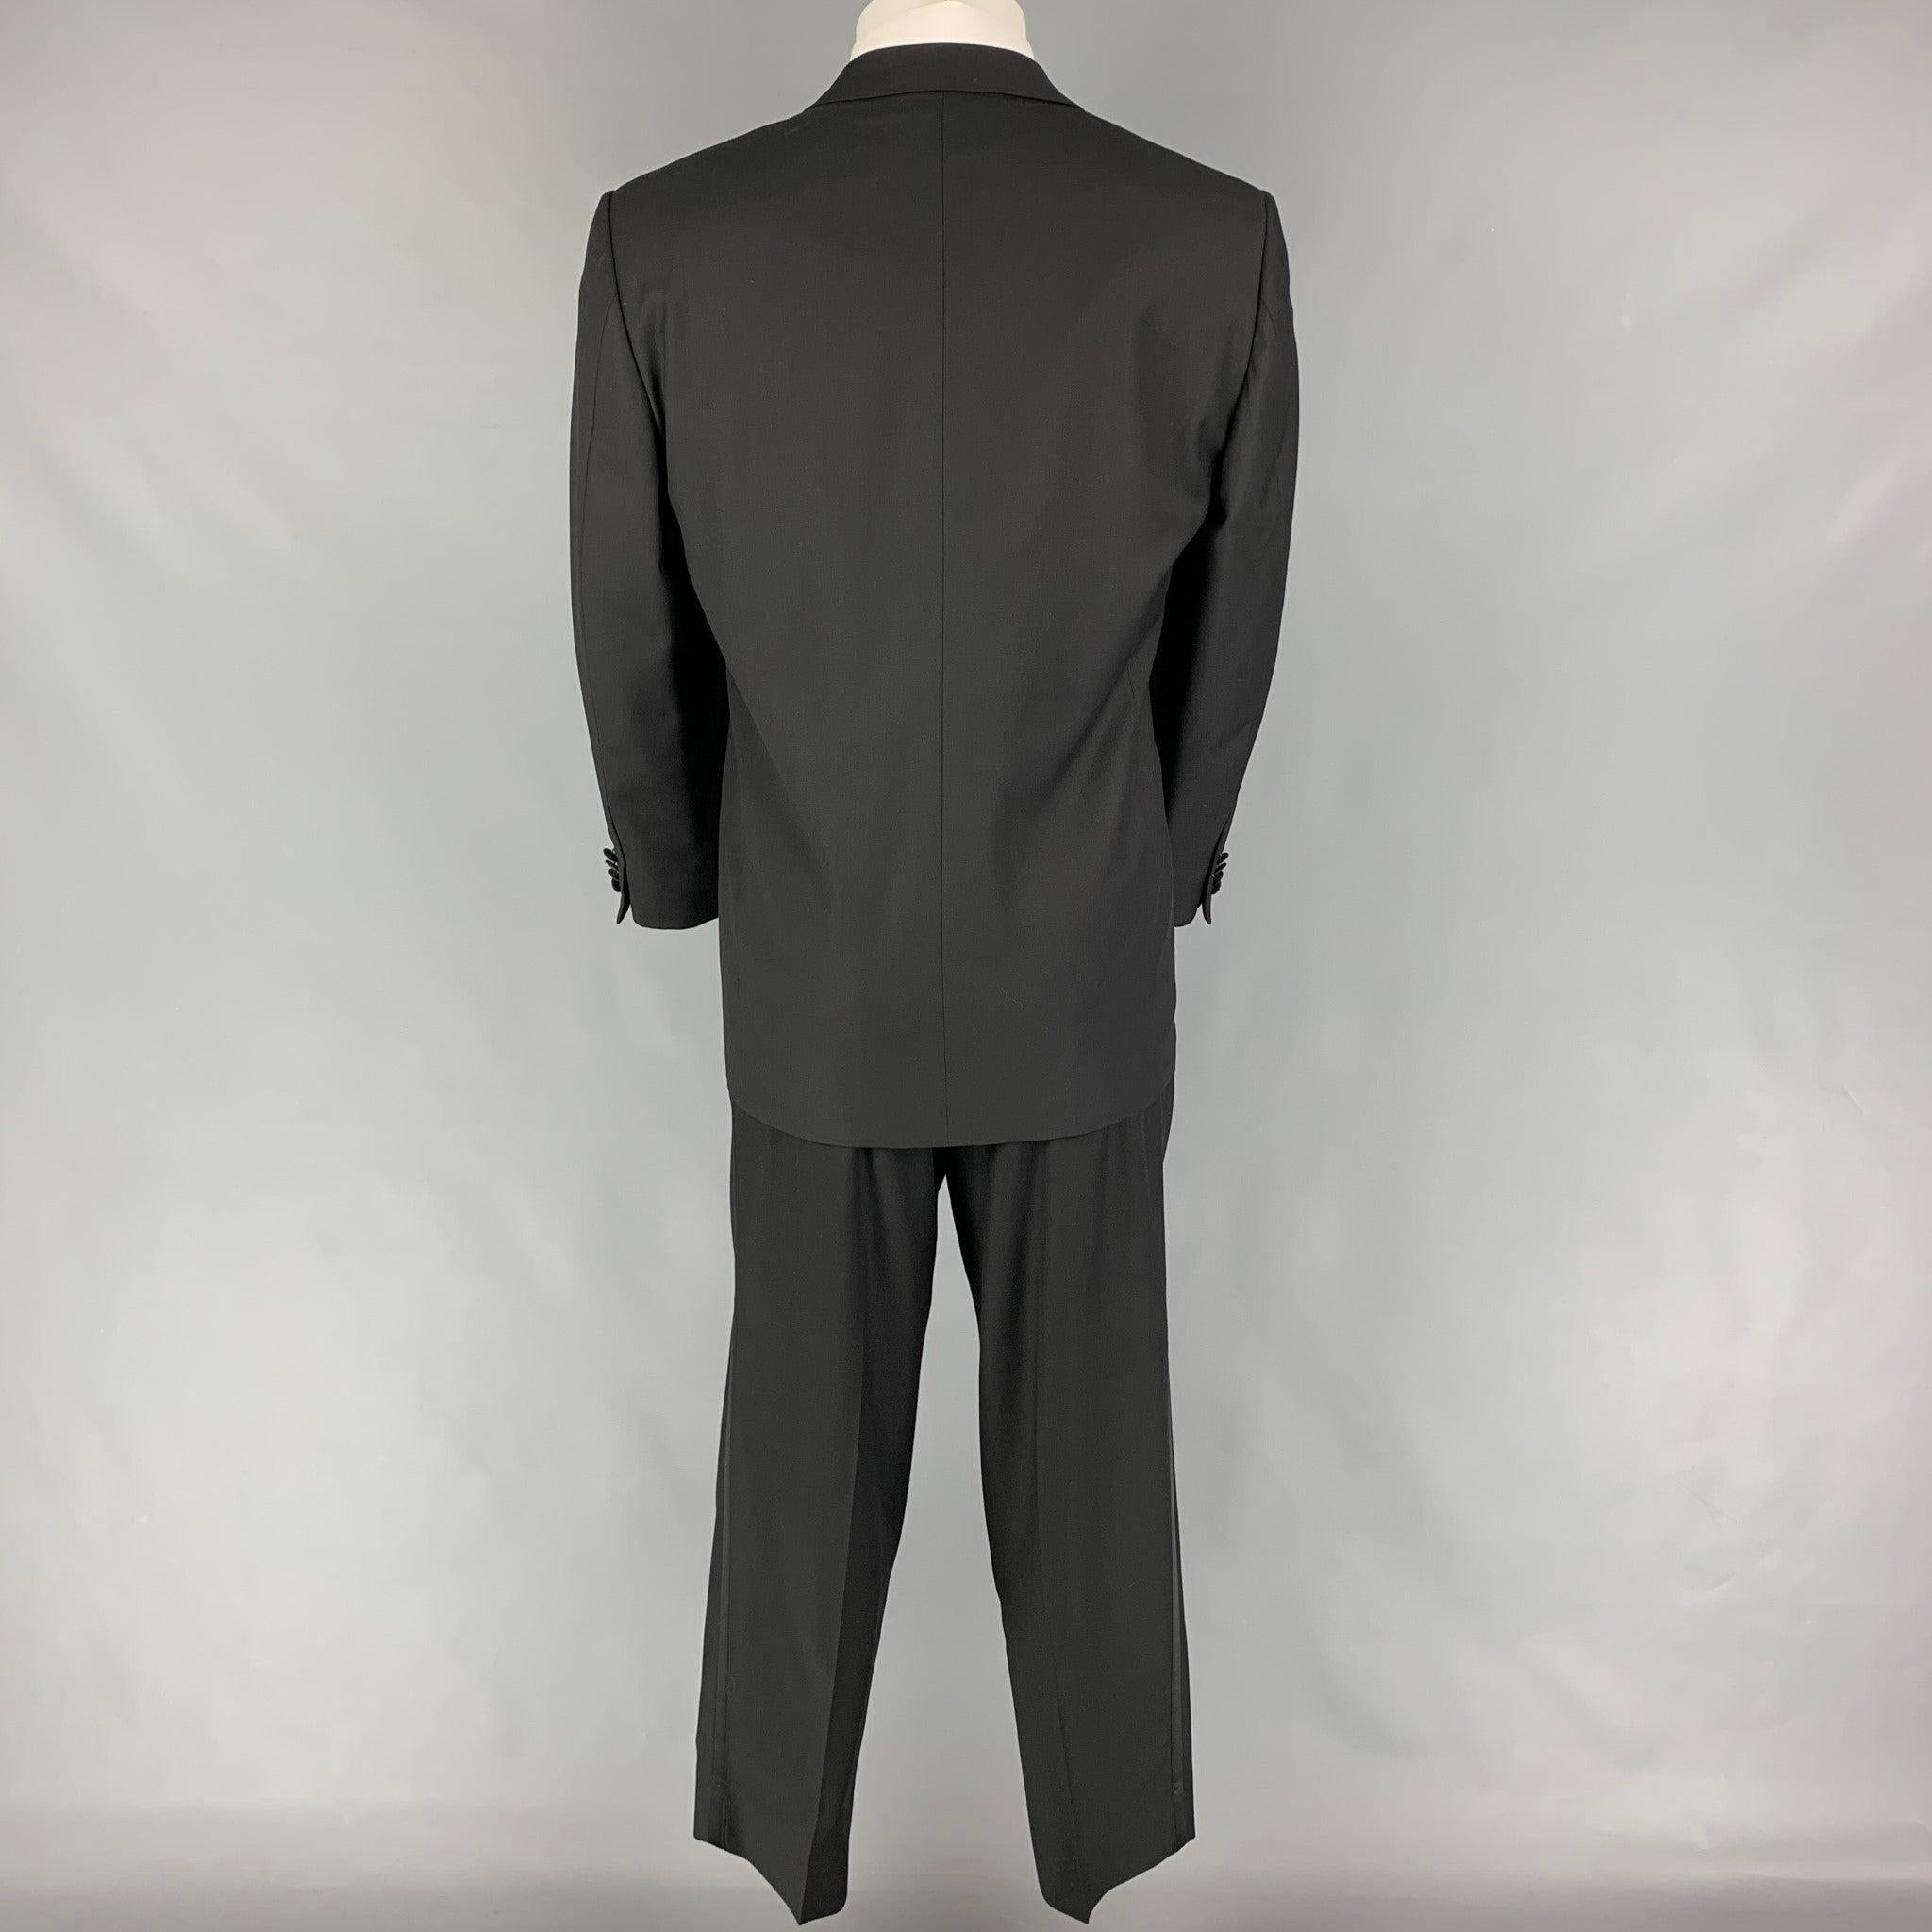 ERMENEGILDO ZEGNA for Neiman Marcus Size 38 Black Wool Suit In Good Condition For Sale In San Francisco, CA